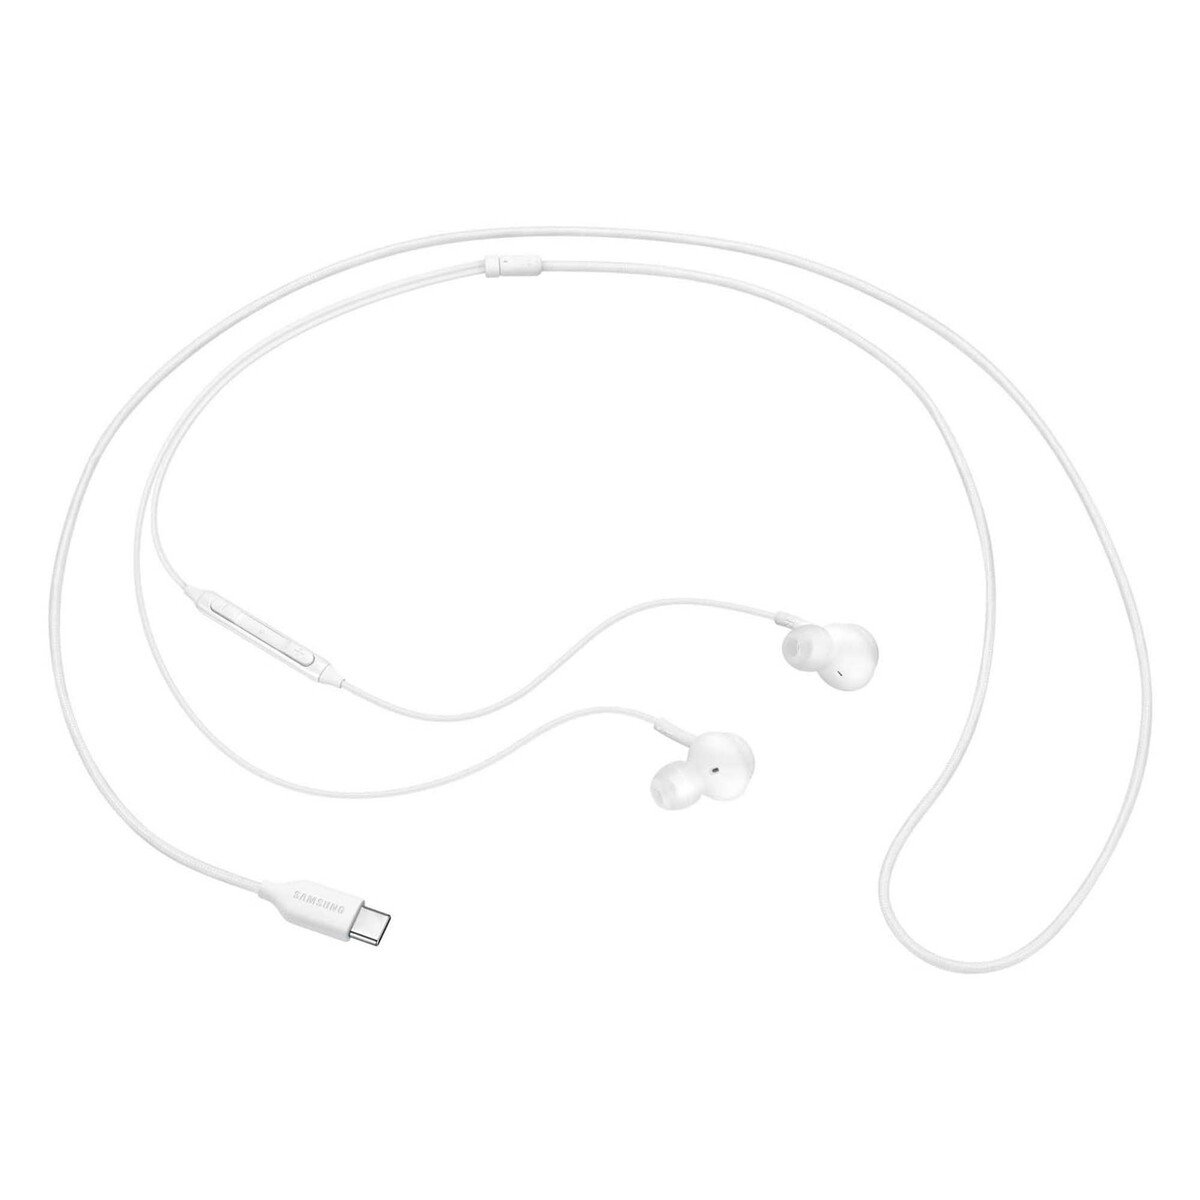 Samsung Stereo In-Ear Earphones Lulu Price Online Hands Mobile | Type-C at Kuwait Free | EO-IC100 Best (White)